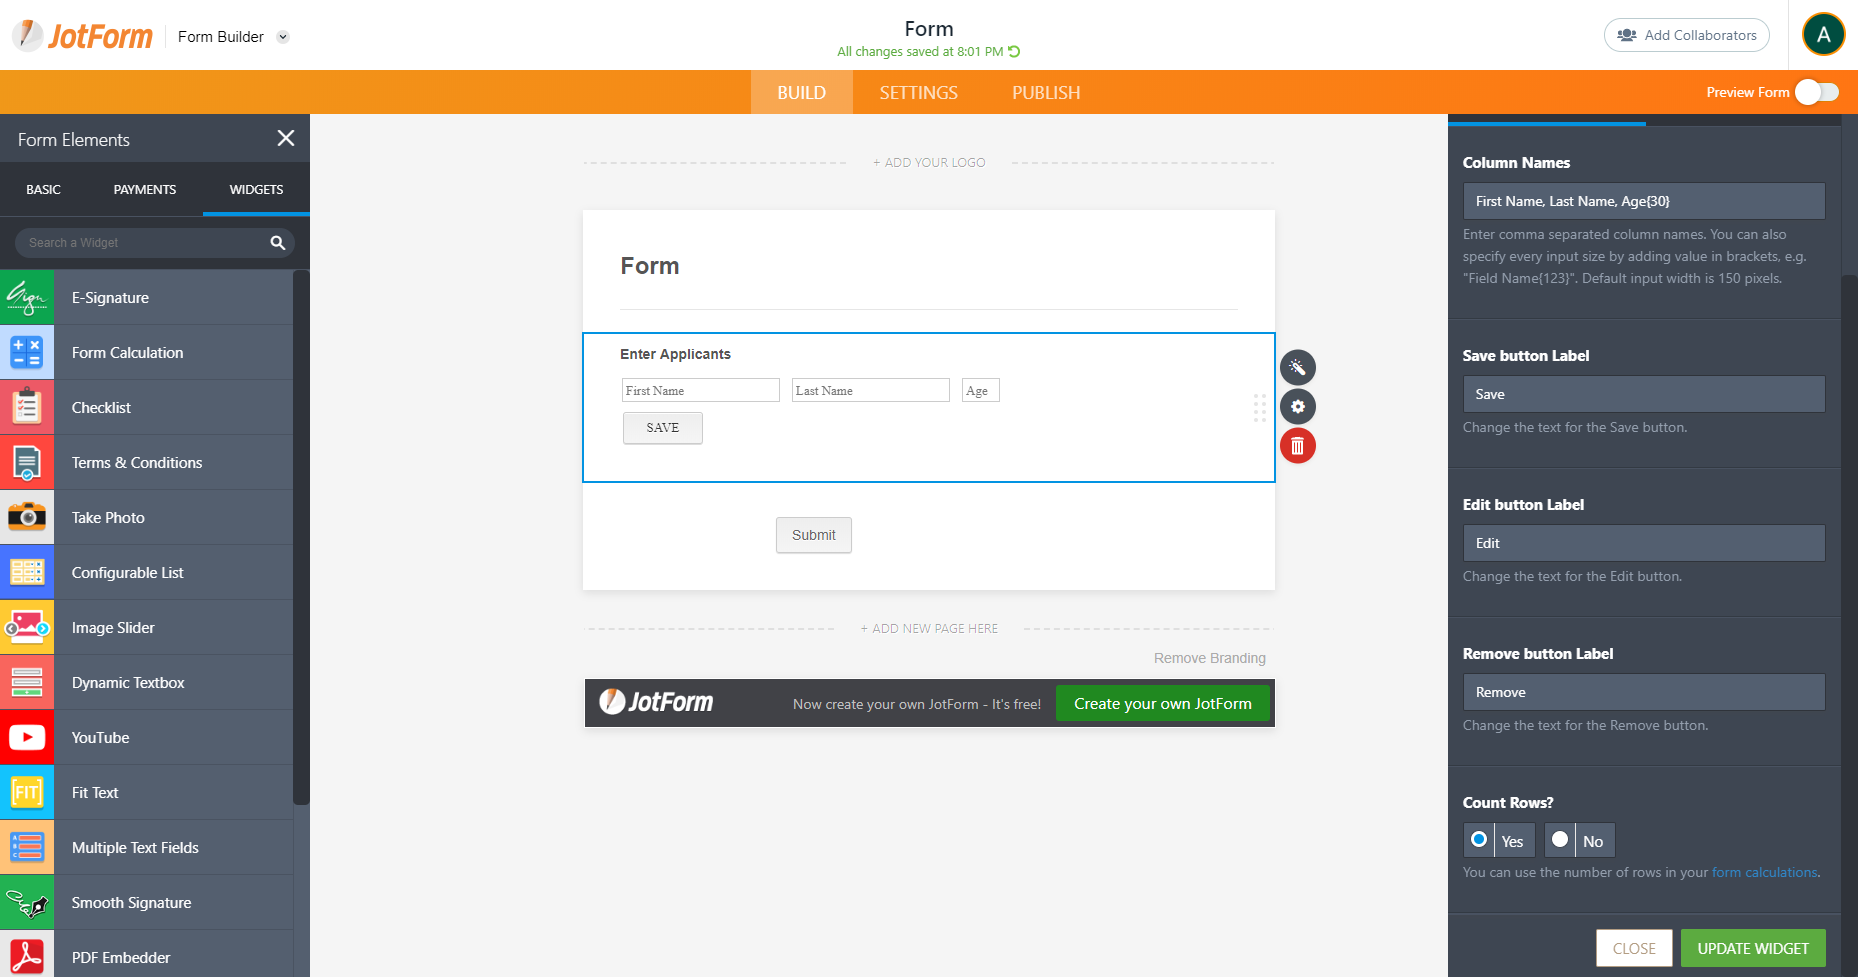 Can you add multiple registrations on one form? Image 1 Screenshot 80